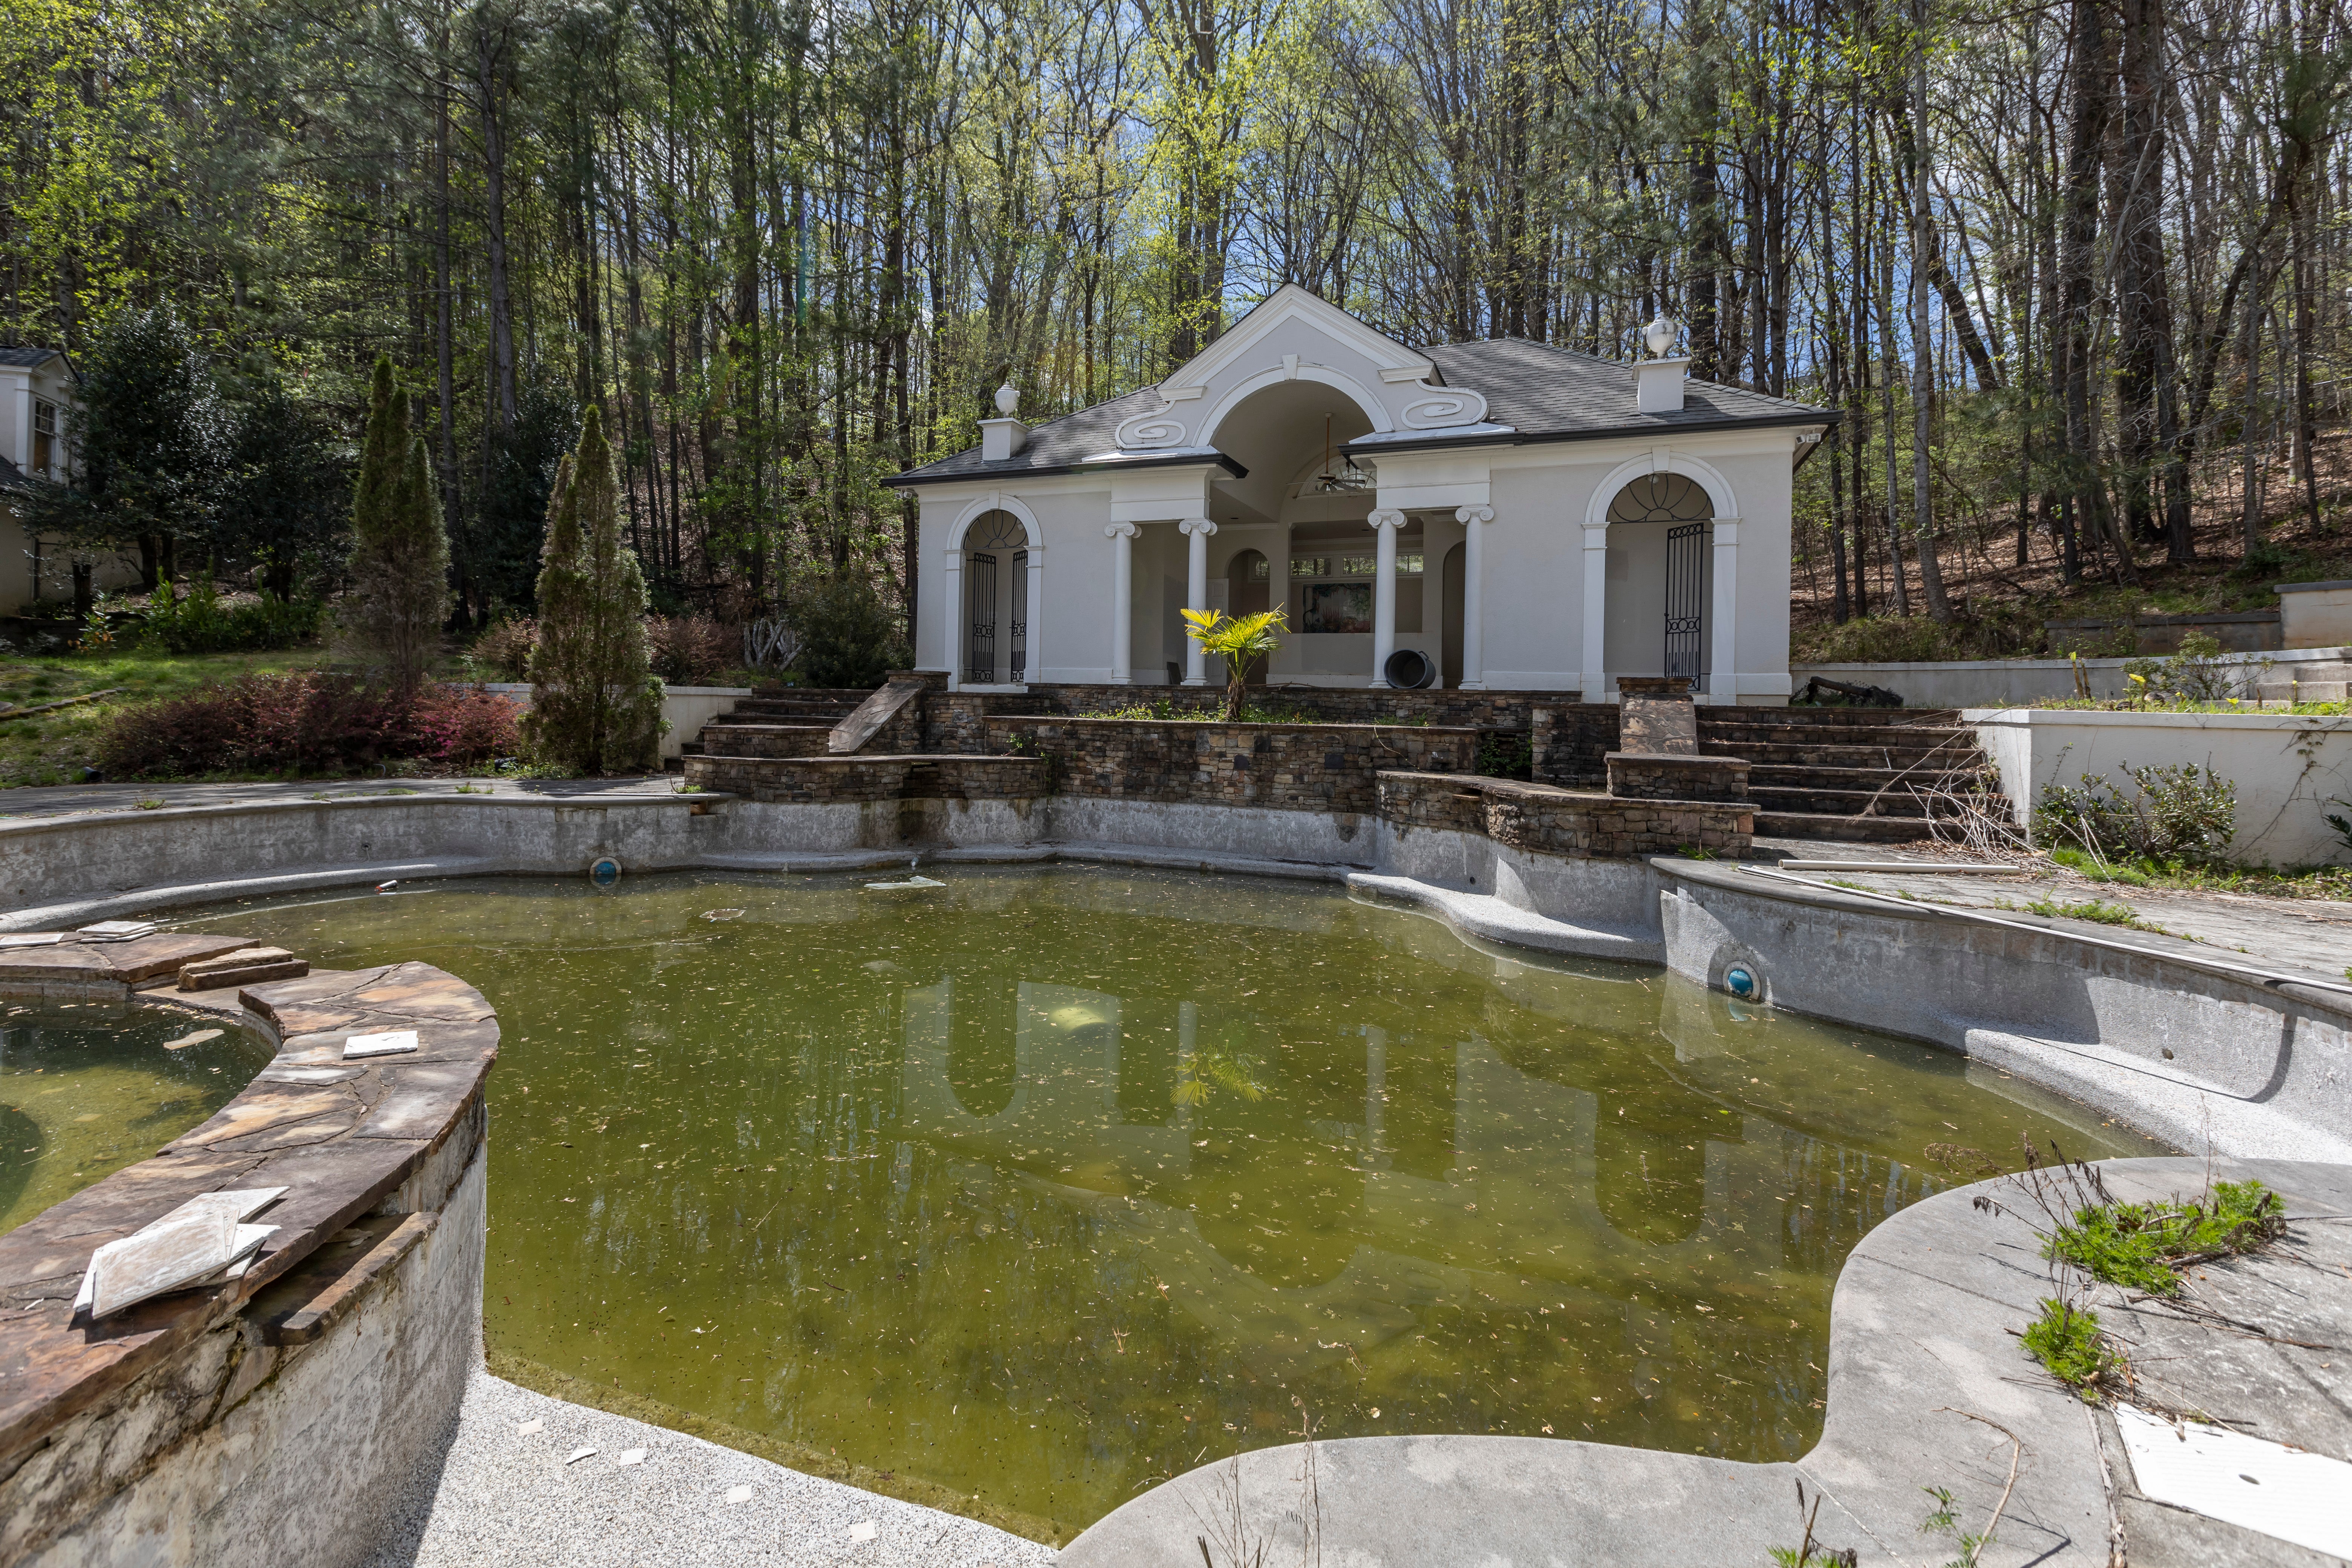 The swimming pool of Diddy’s former Atlanta property